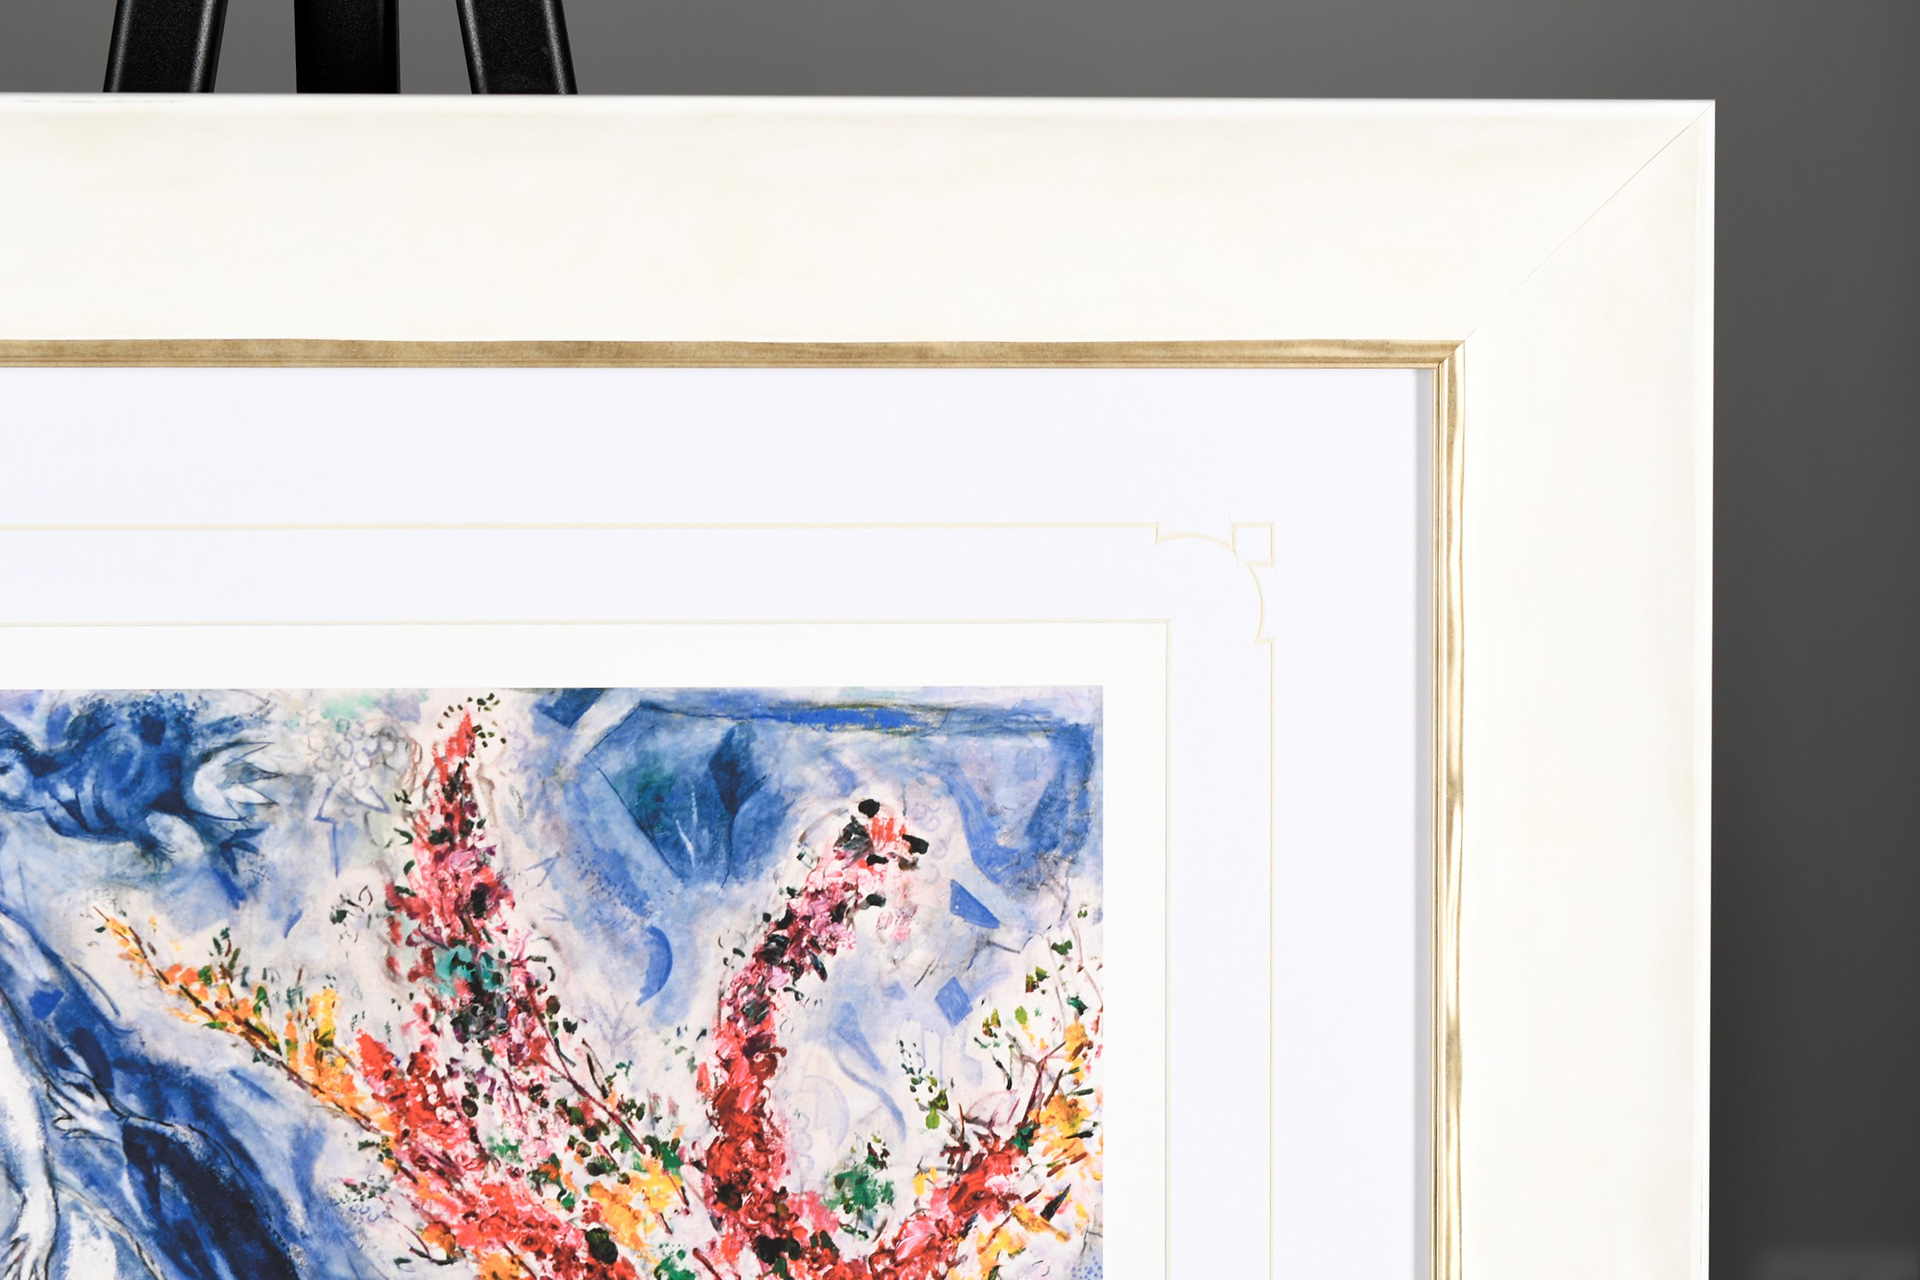 Limited Edition Marc Chagall "Flowers Over Paris" 1 of only 50 Worldwide.